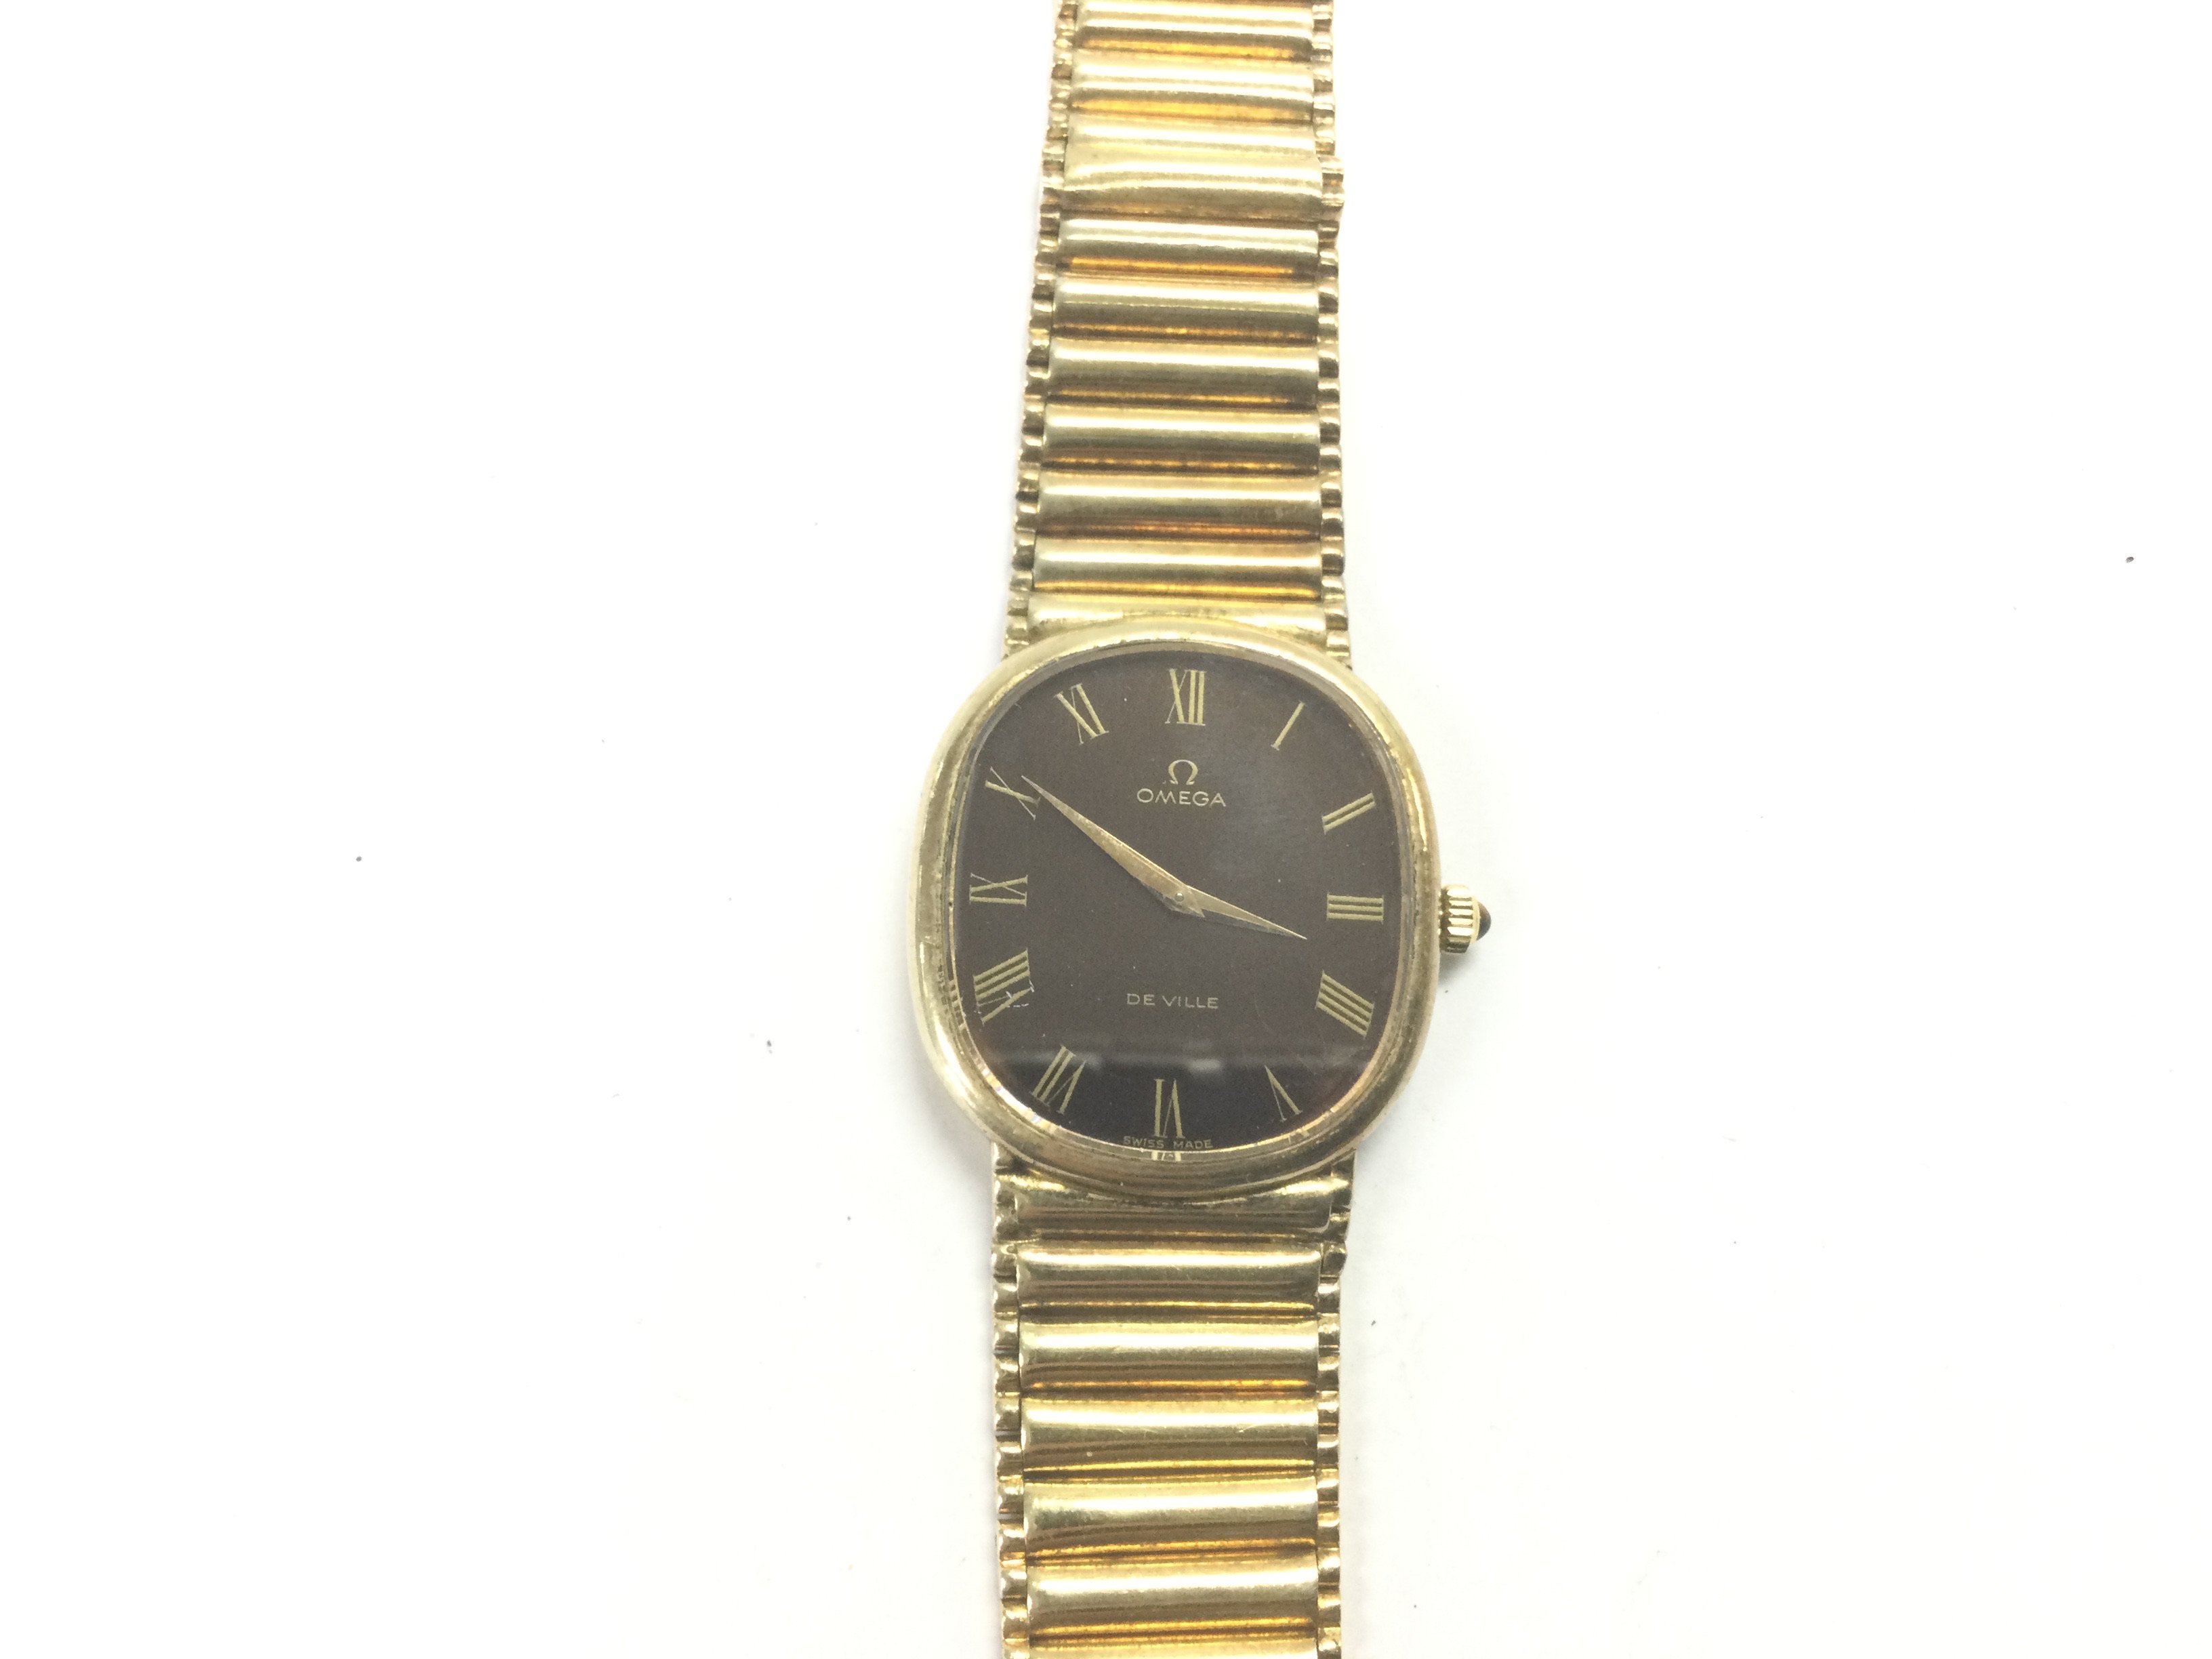 A gents silver gilt Omega DeVille watch. Shipping